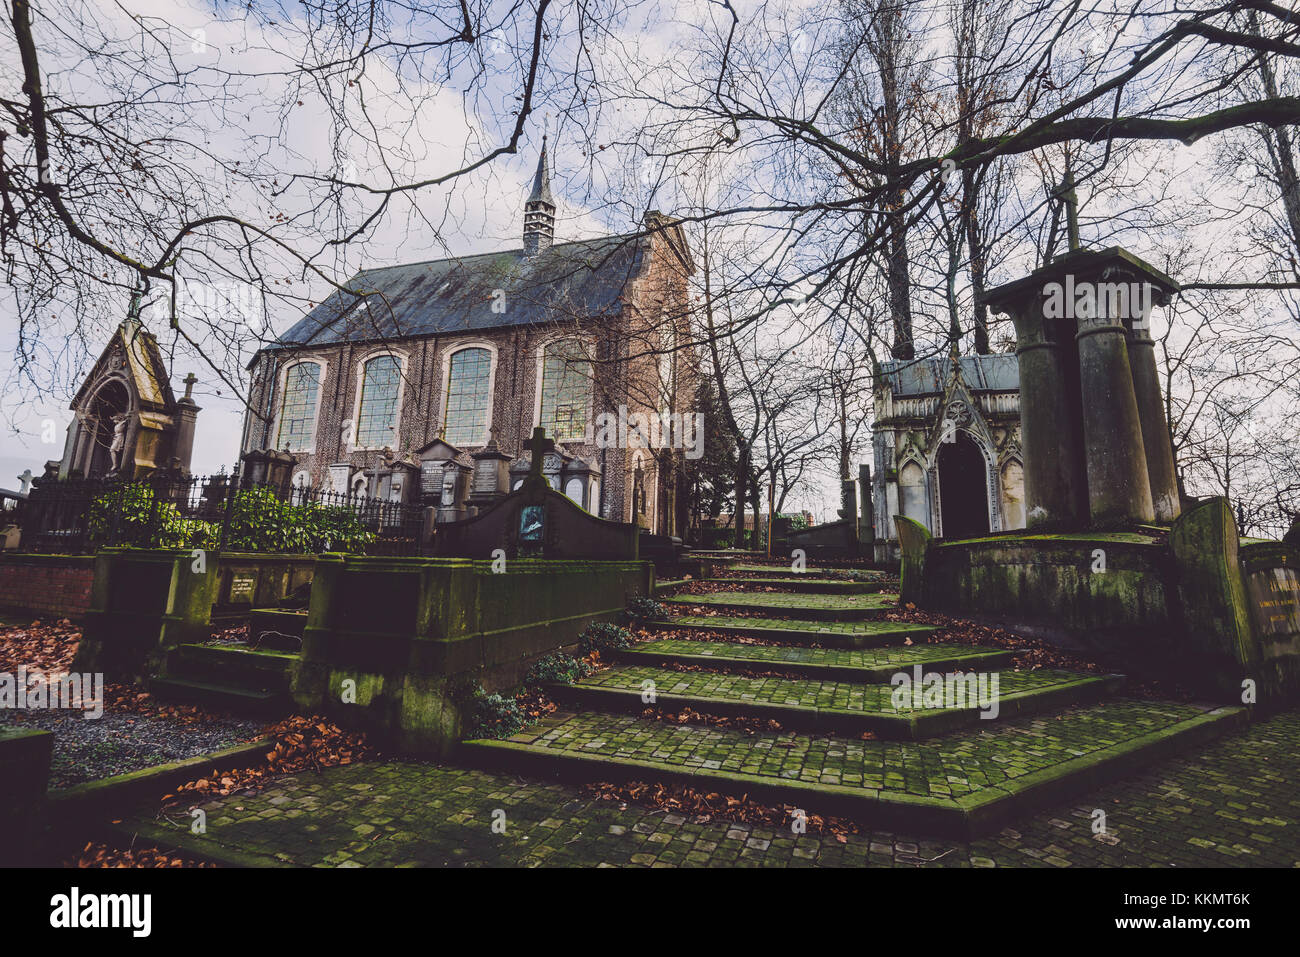 Historic Cemetery and Chapel in Ghent, Belgium Stock Photo